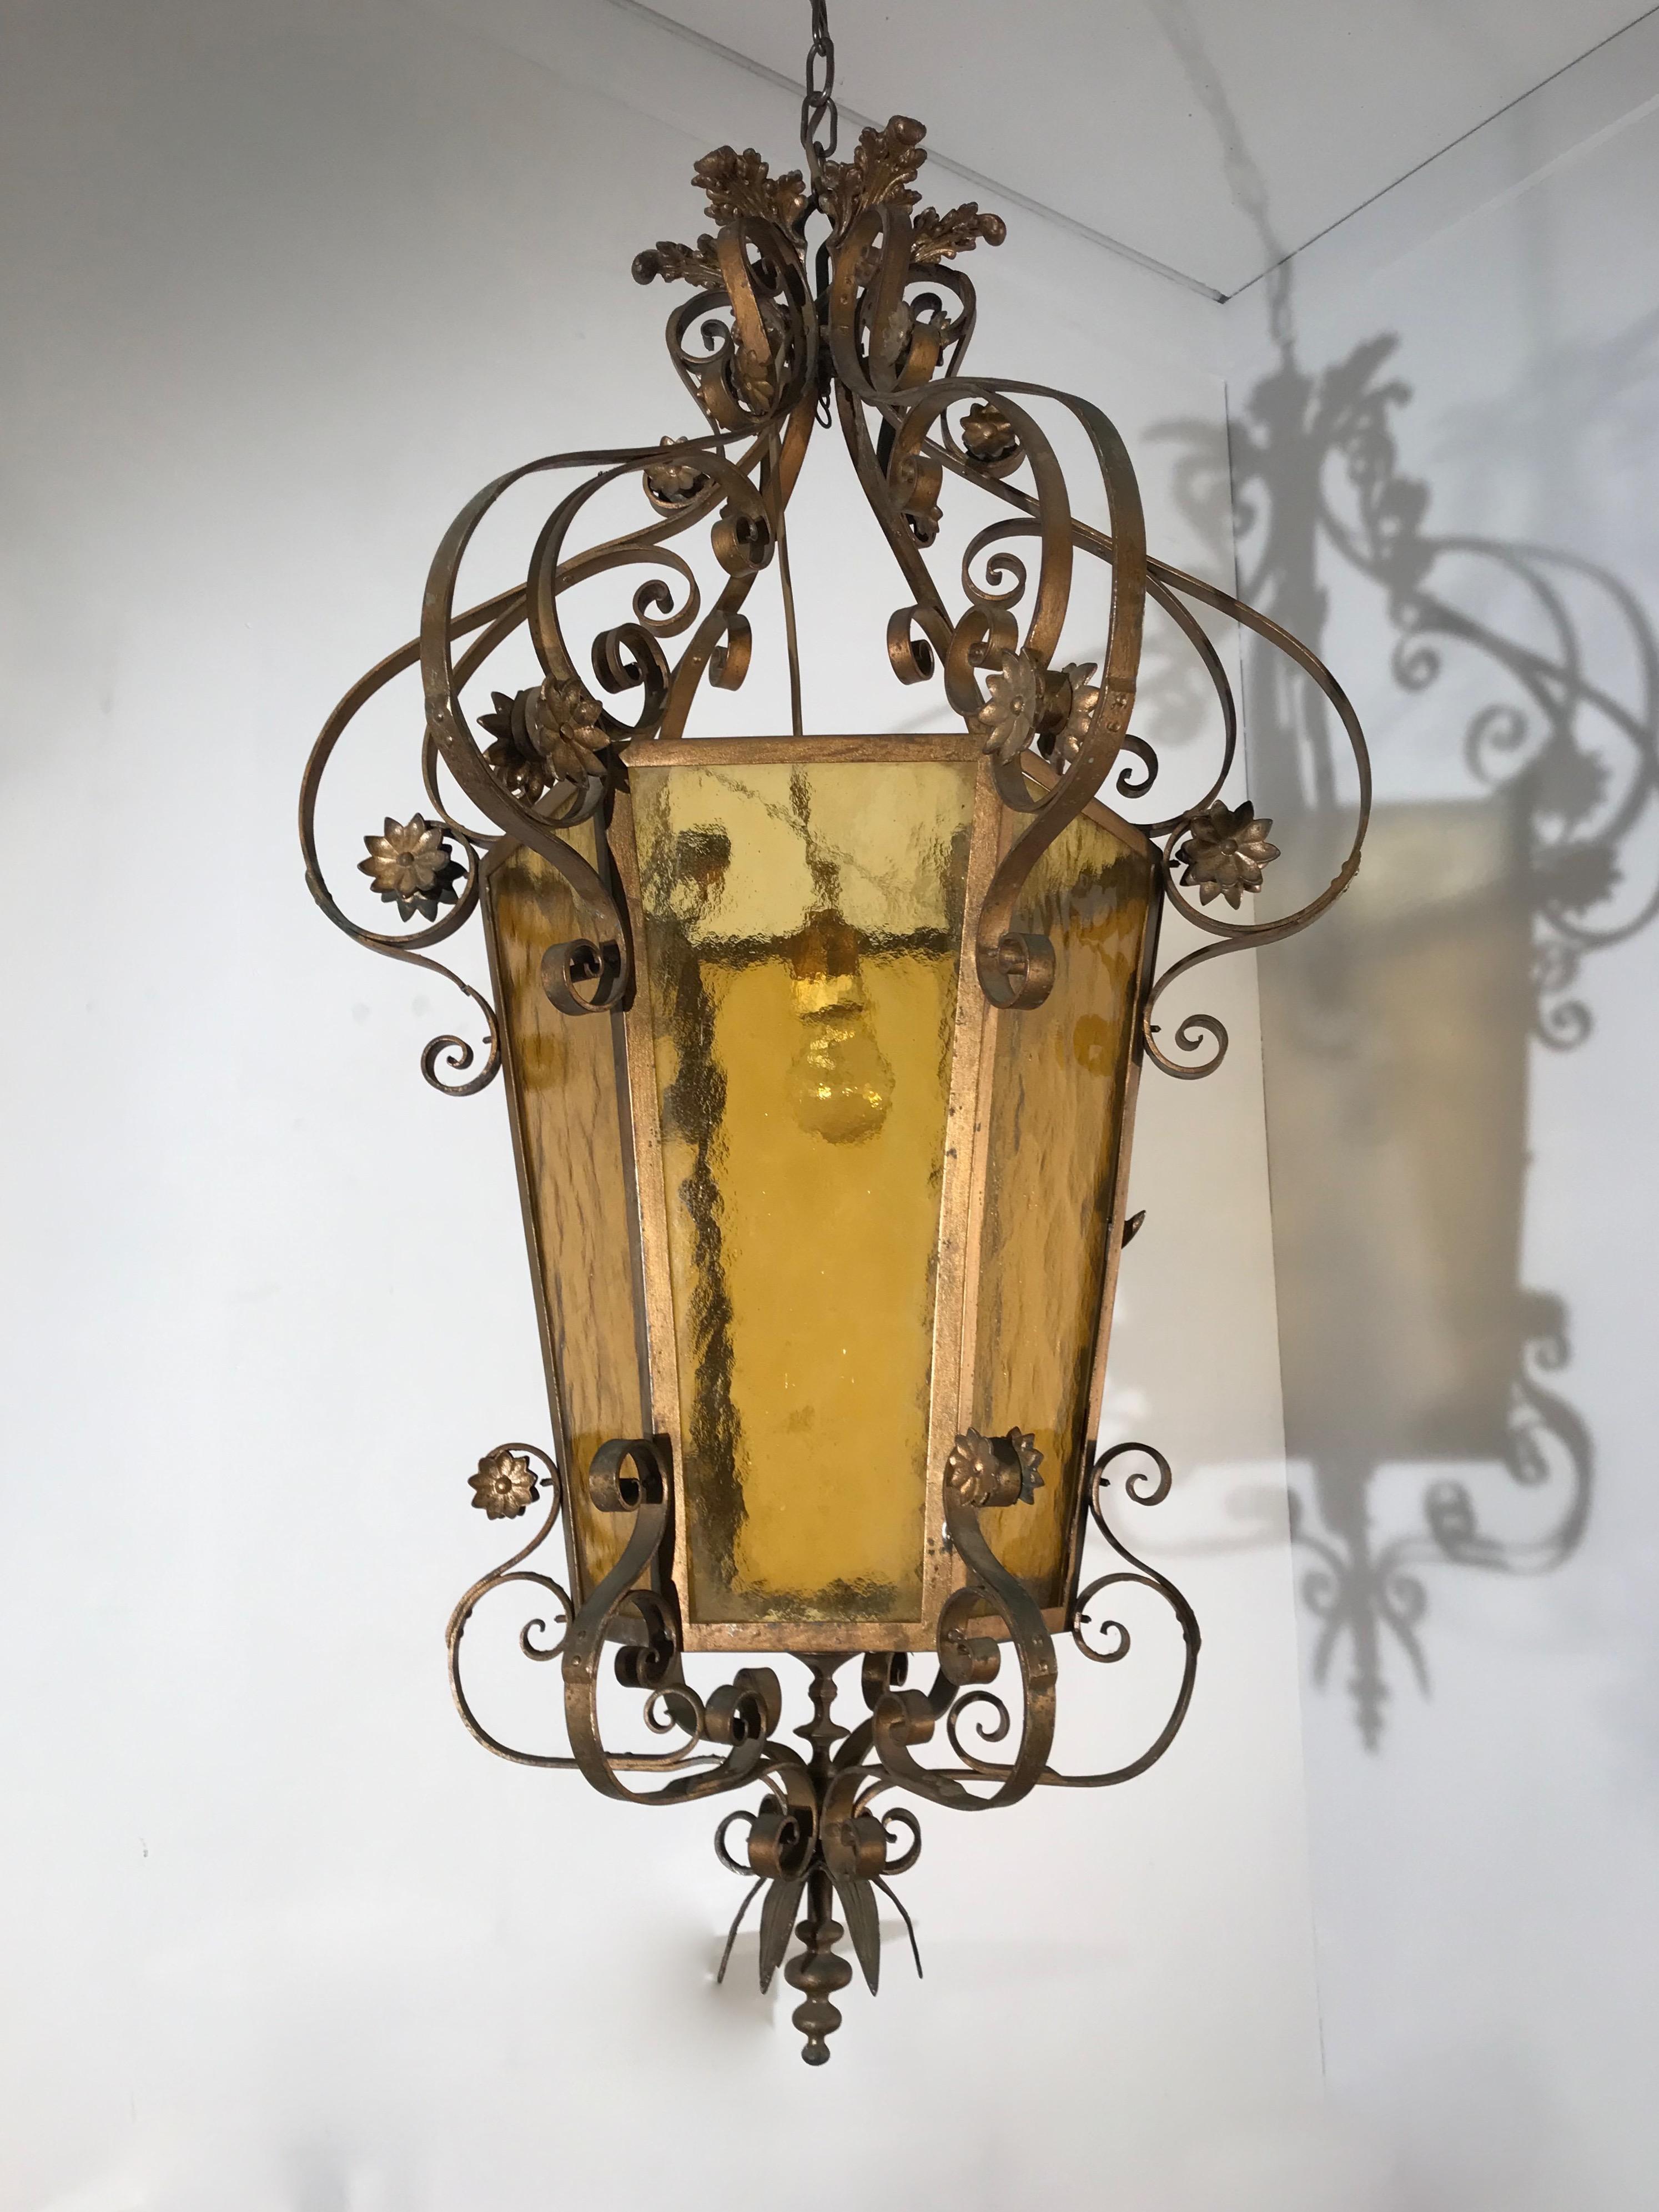 European Rare Large Arts & Crafts Brass and Colored Glass Hexagonal Lantern or Chandelier